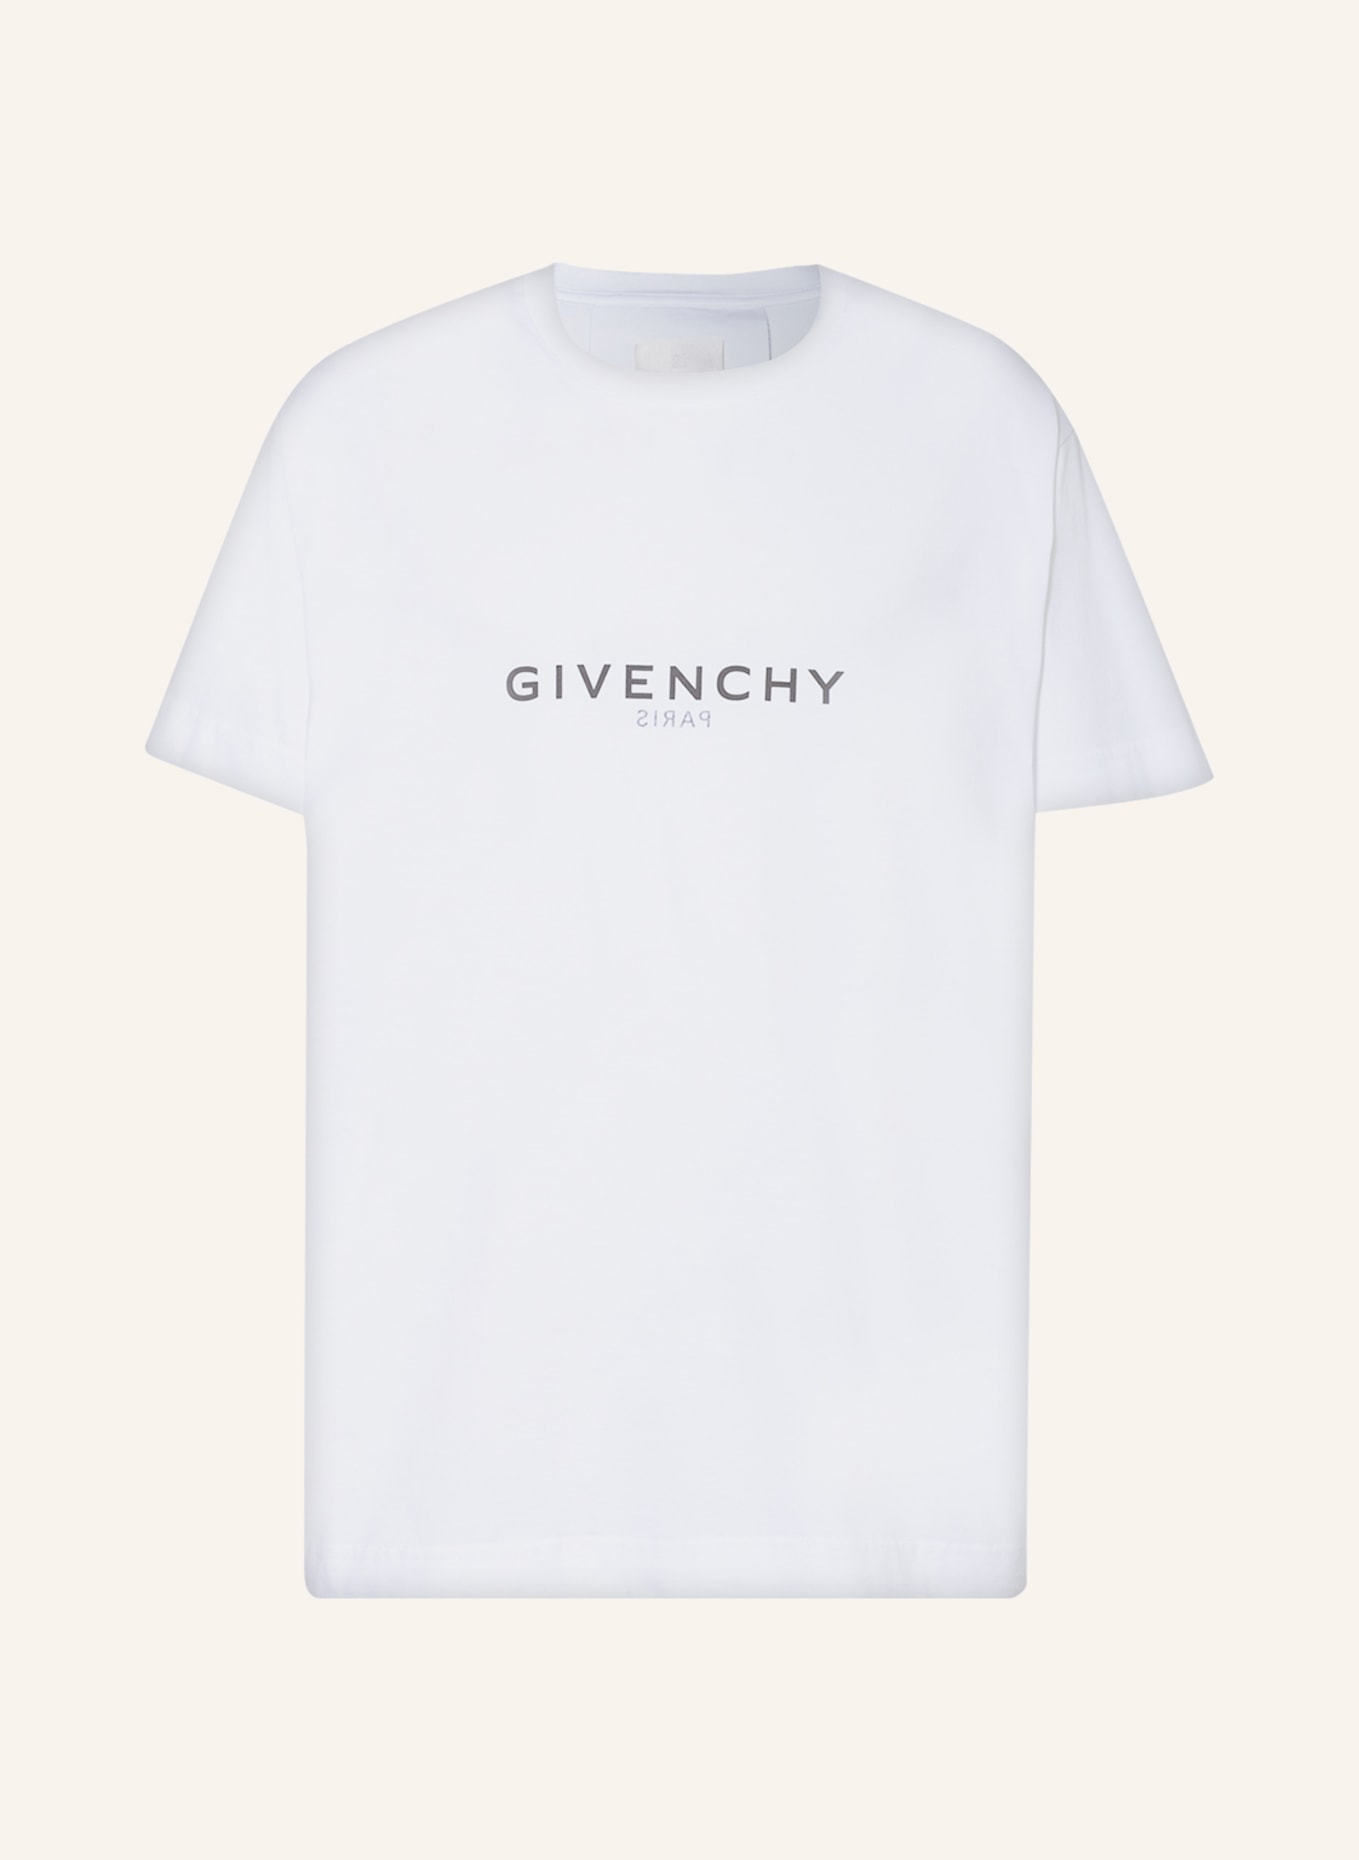 GIVENCHY Oversized-Shirt, Farbe: WEISS (Bild 1)